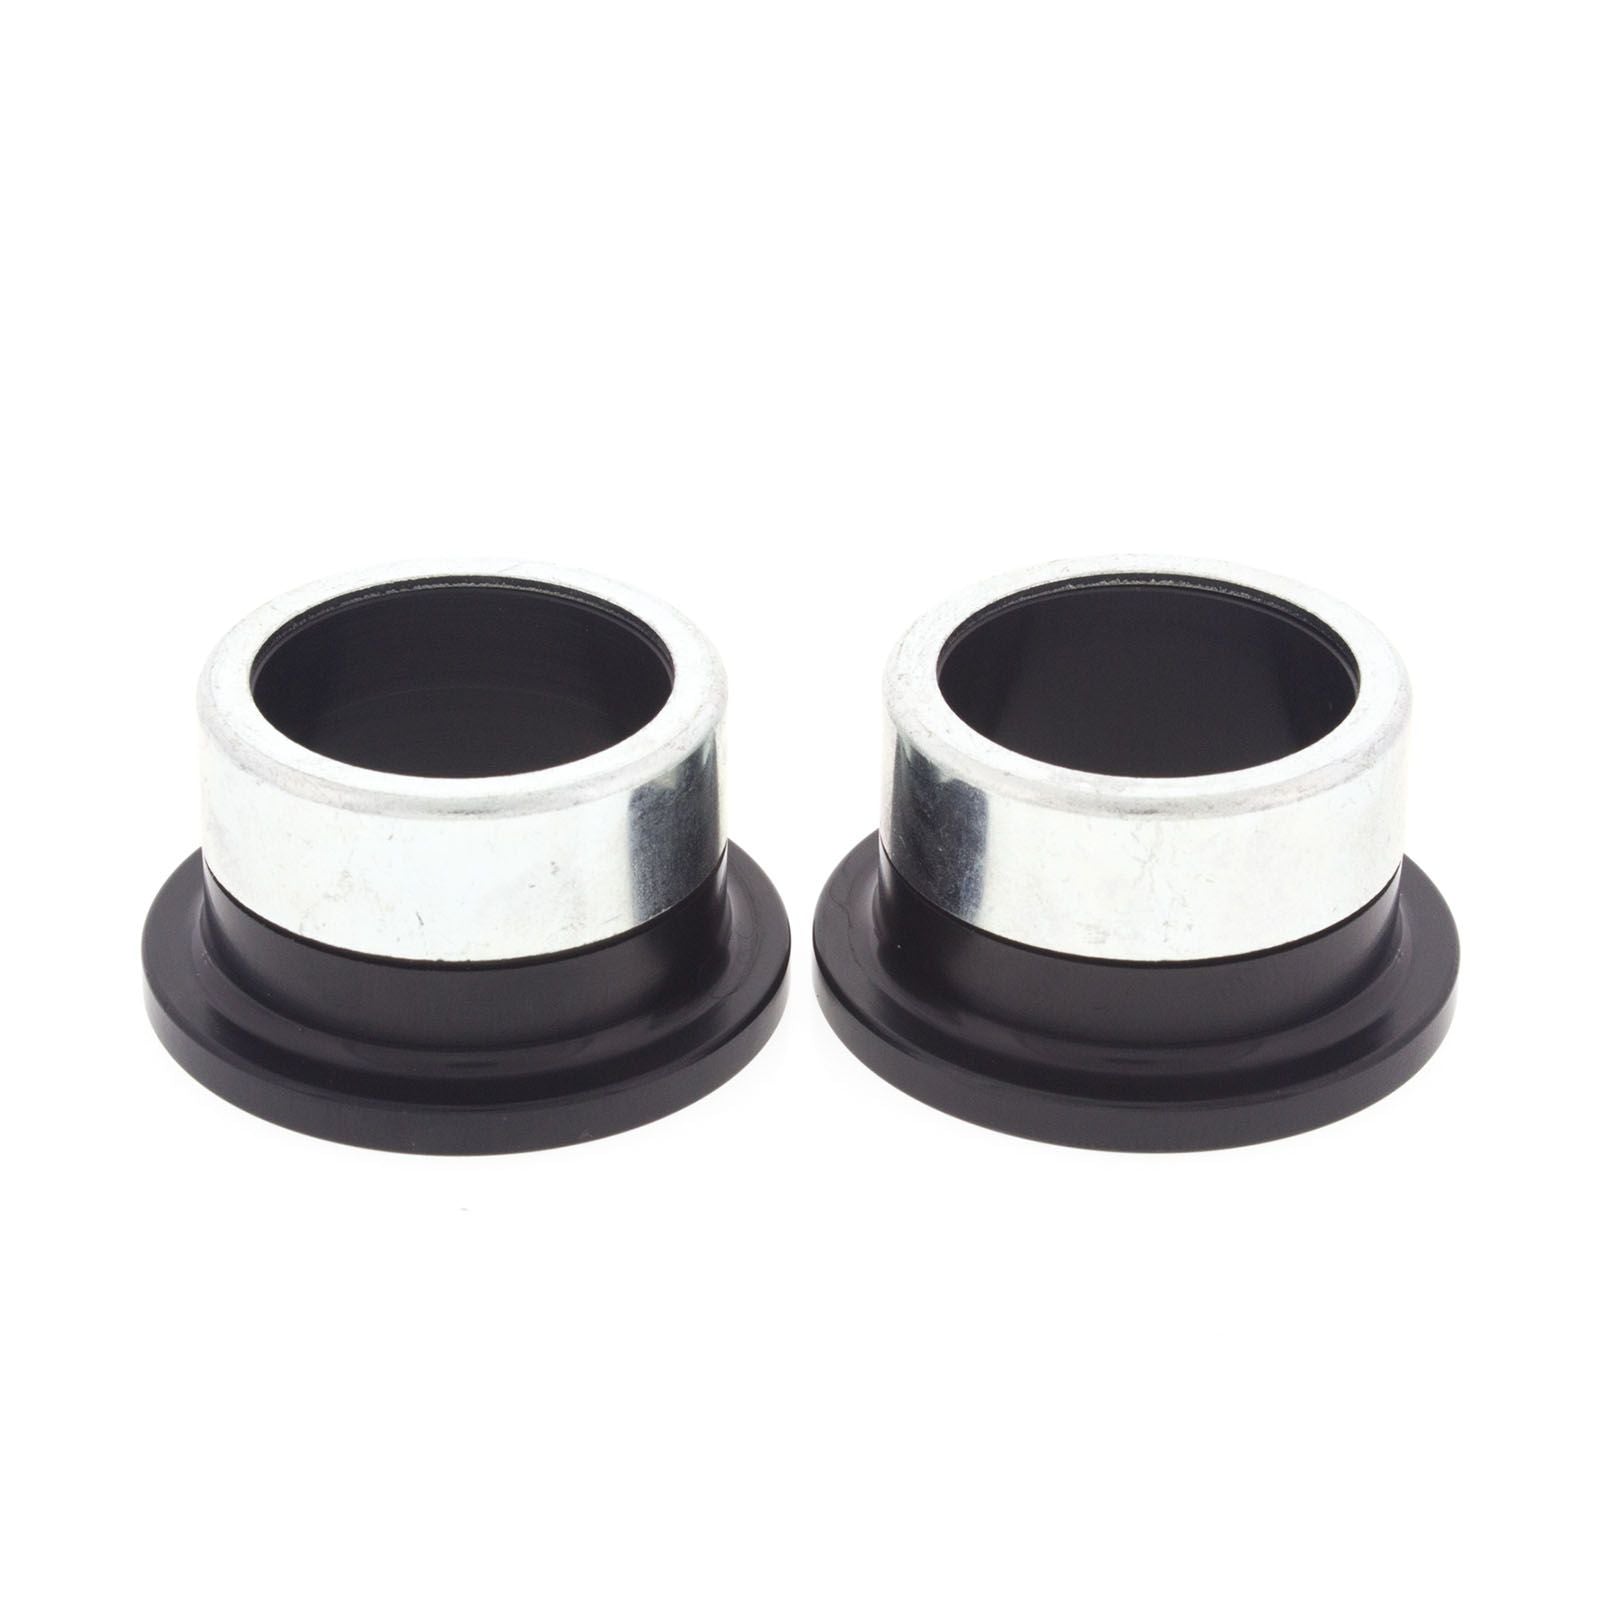 New ALL BALLS Racing Wheel Spacer Kit #AB1110991